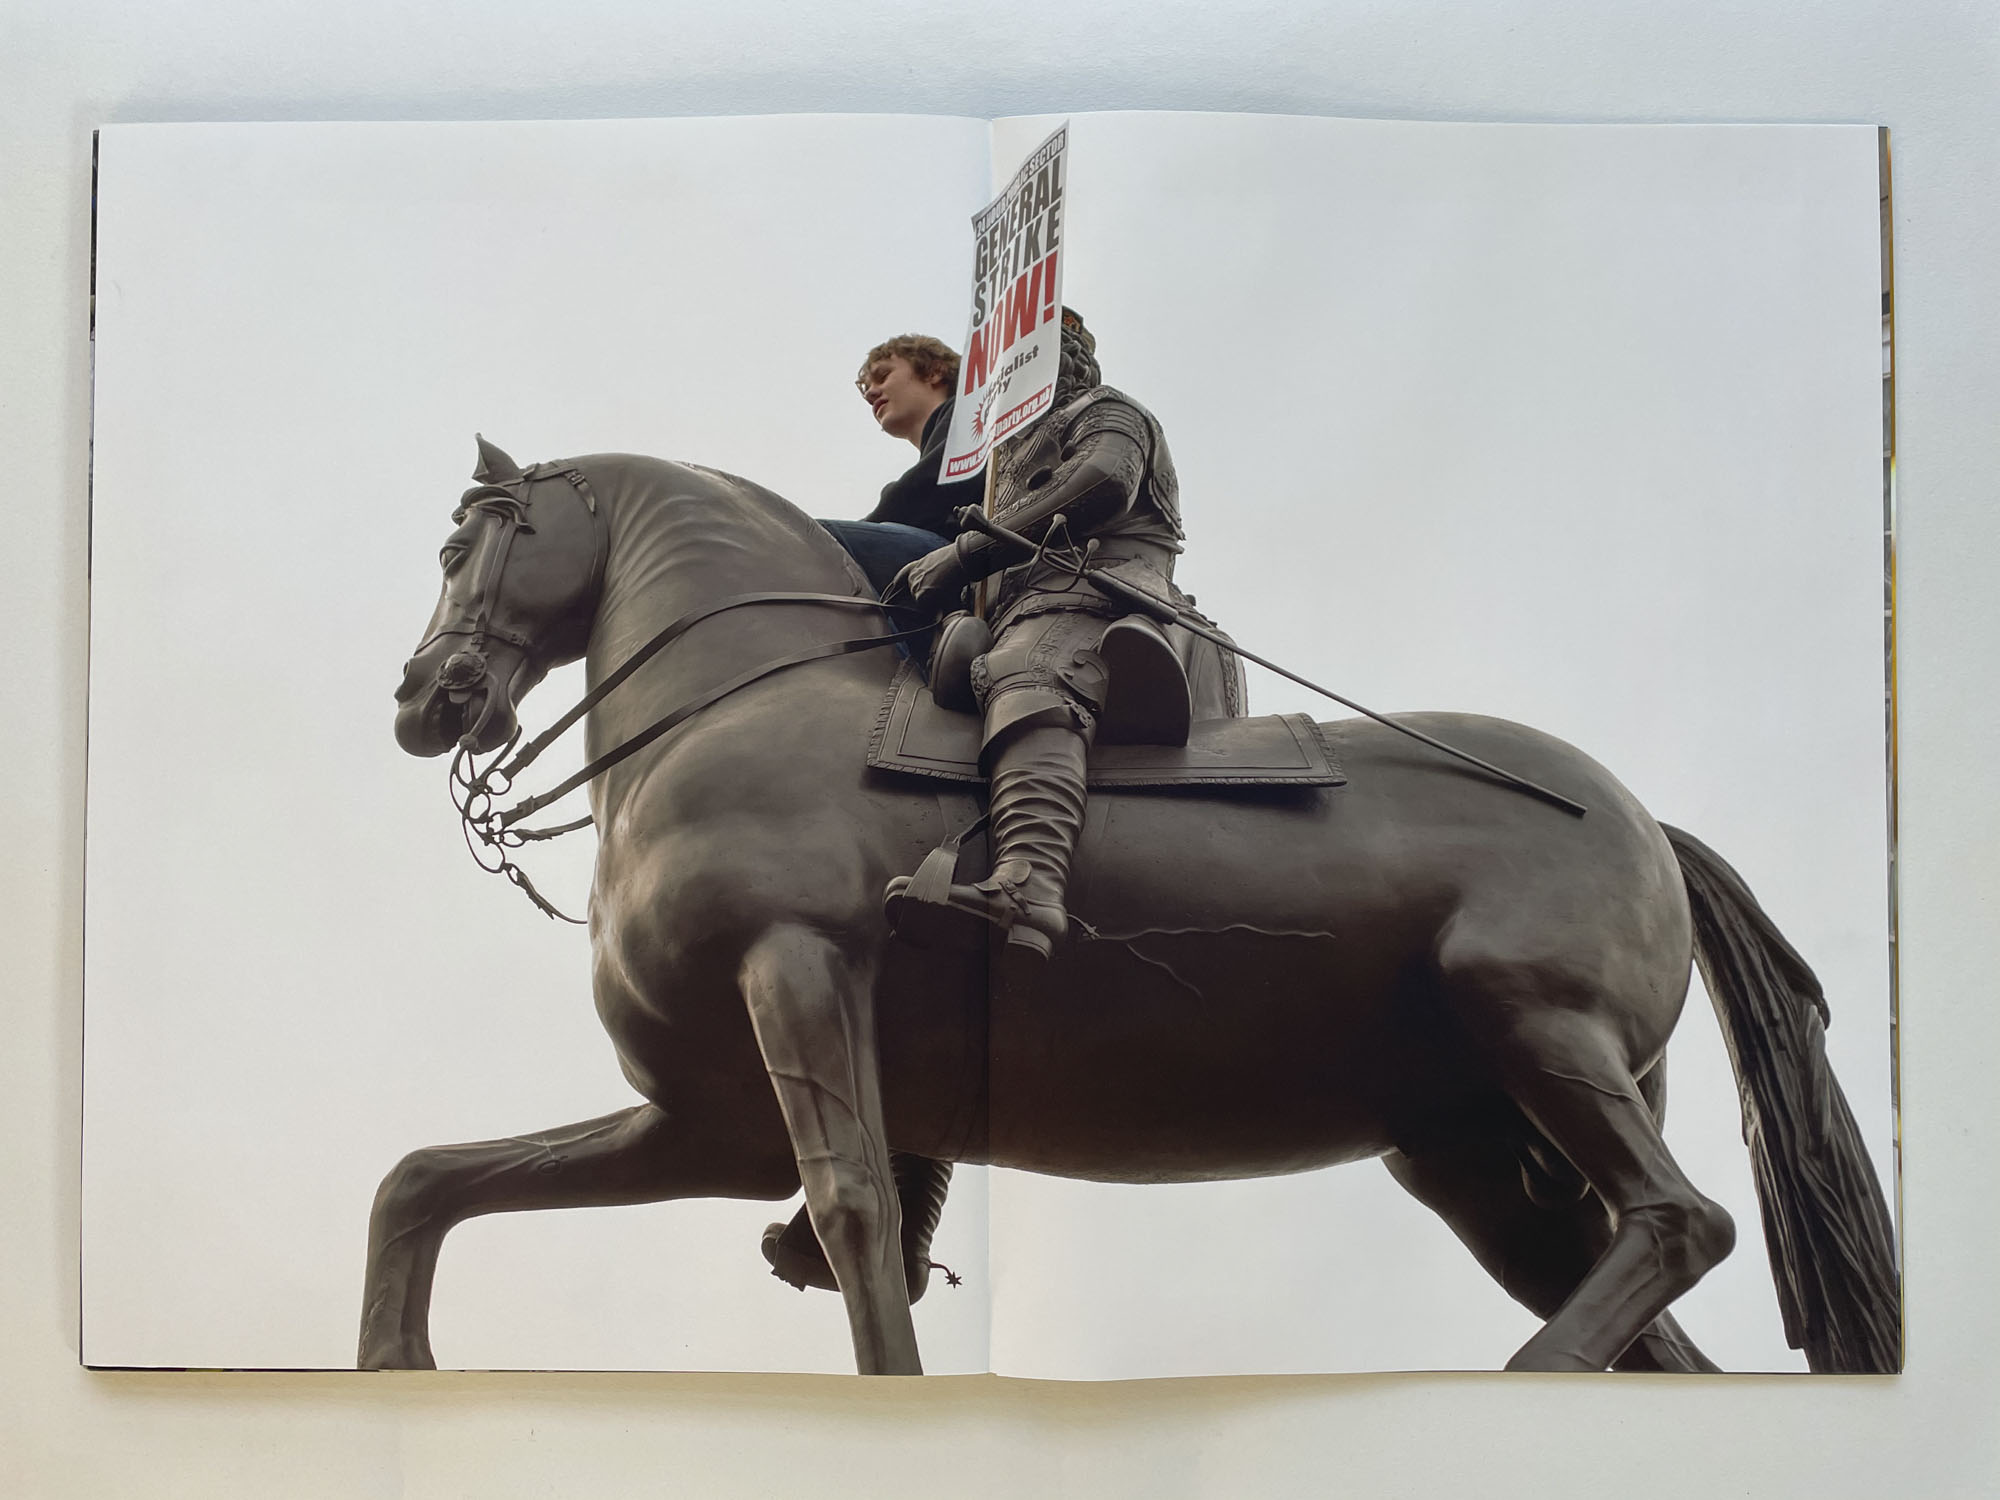 looking up at a statue of a horse and rider, a young man is also sitting on the horse holding a placard that says General Strike Now!